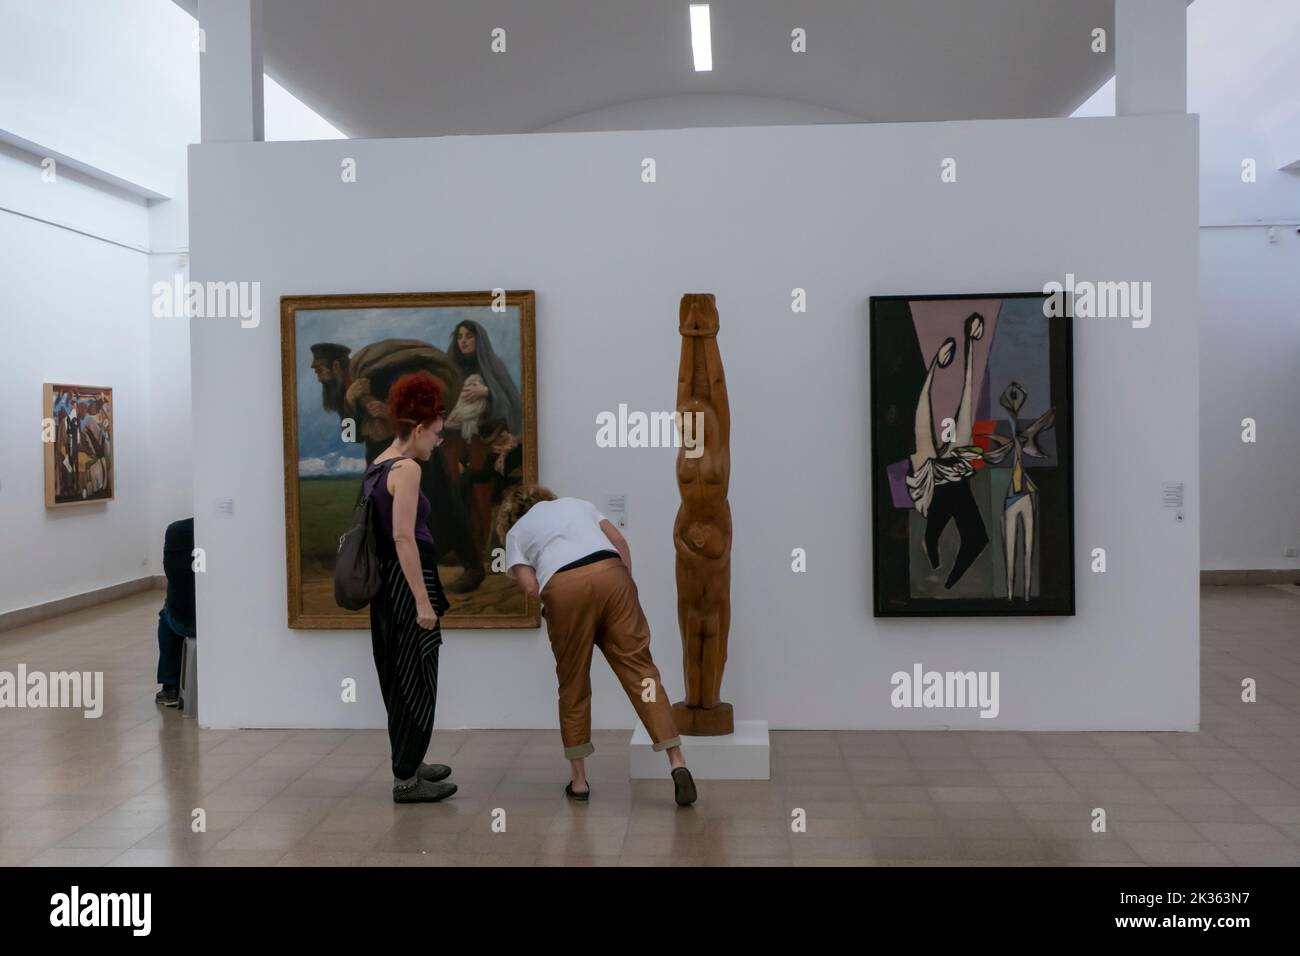 Visitors view artwork by Israeli artists inside the Mishkan Museum of Art located on the grounds of Kibbutz Ein Harod Meuhad in Israel. The museum was designed by architect Samuel Bickels, inaugurated in 1948 and was the first rural museum run by a kibbutz. Stock Photo